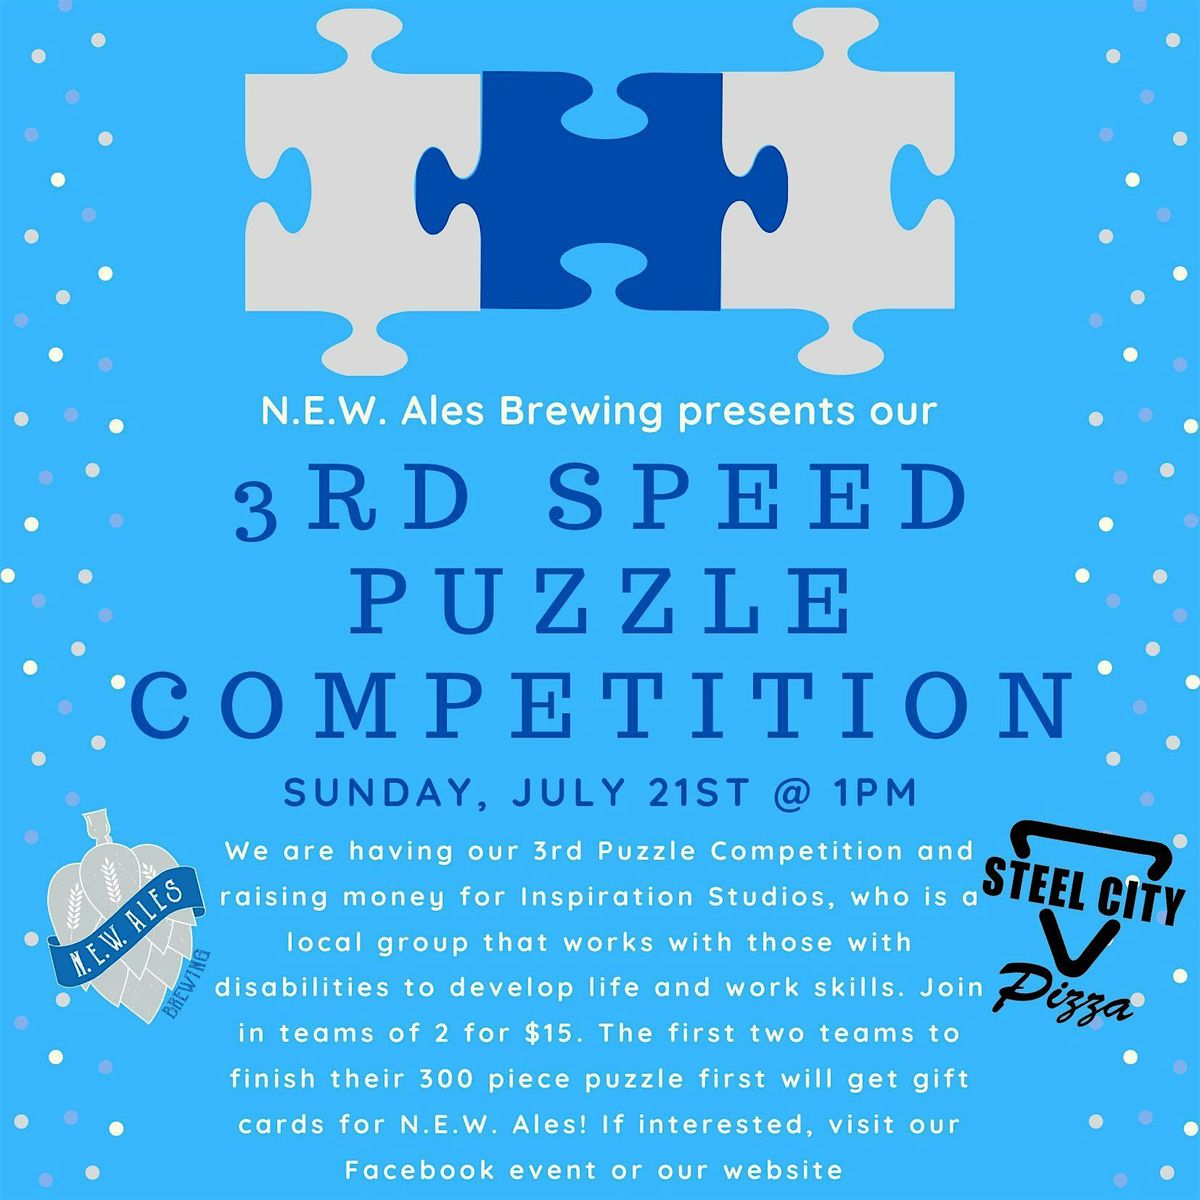 3rd Speed Puzzle Competition at N.E.W. Ales Brewing